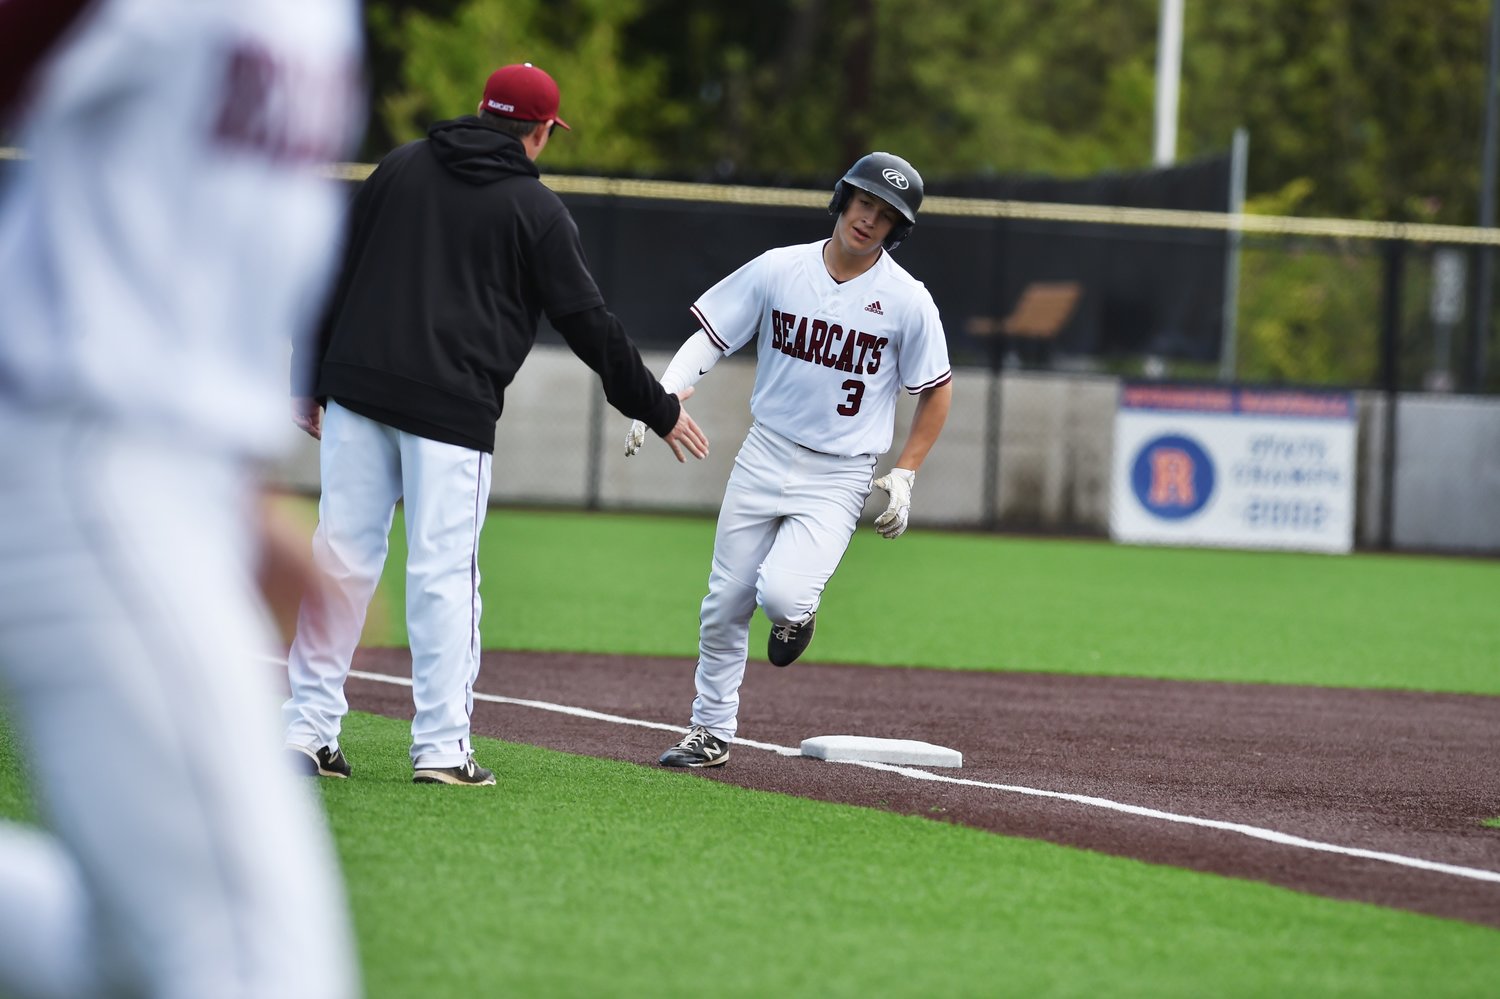 Evan Stajduhar rounds third base and heads for home as his teammates mob out of the dugout to congratulate him after swatting a home run in the second inning against Mark Morris in the 2A District 4 tournament May 14 in Ridgefield.